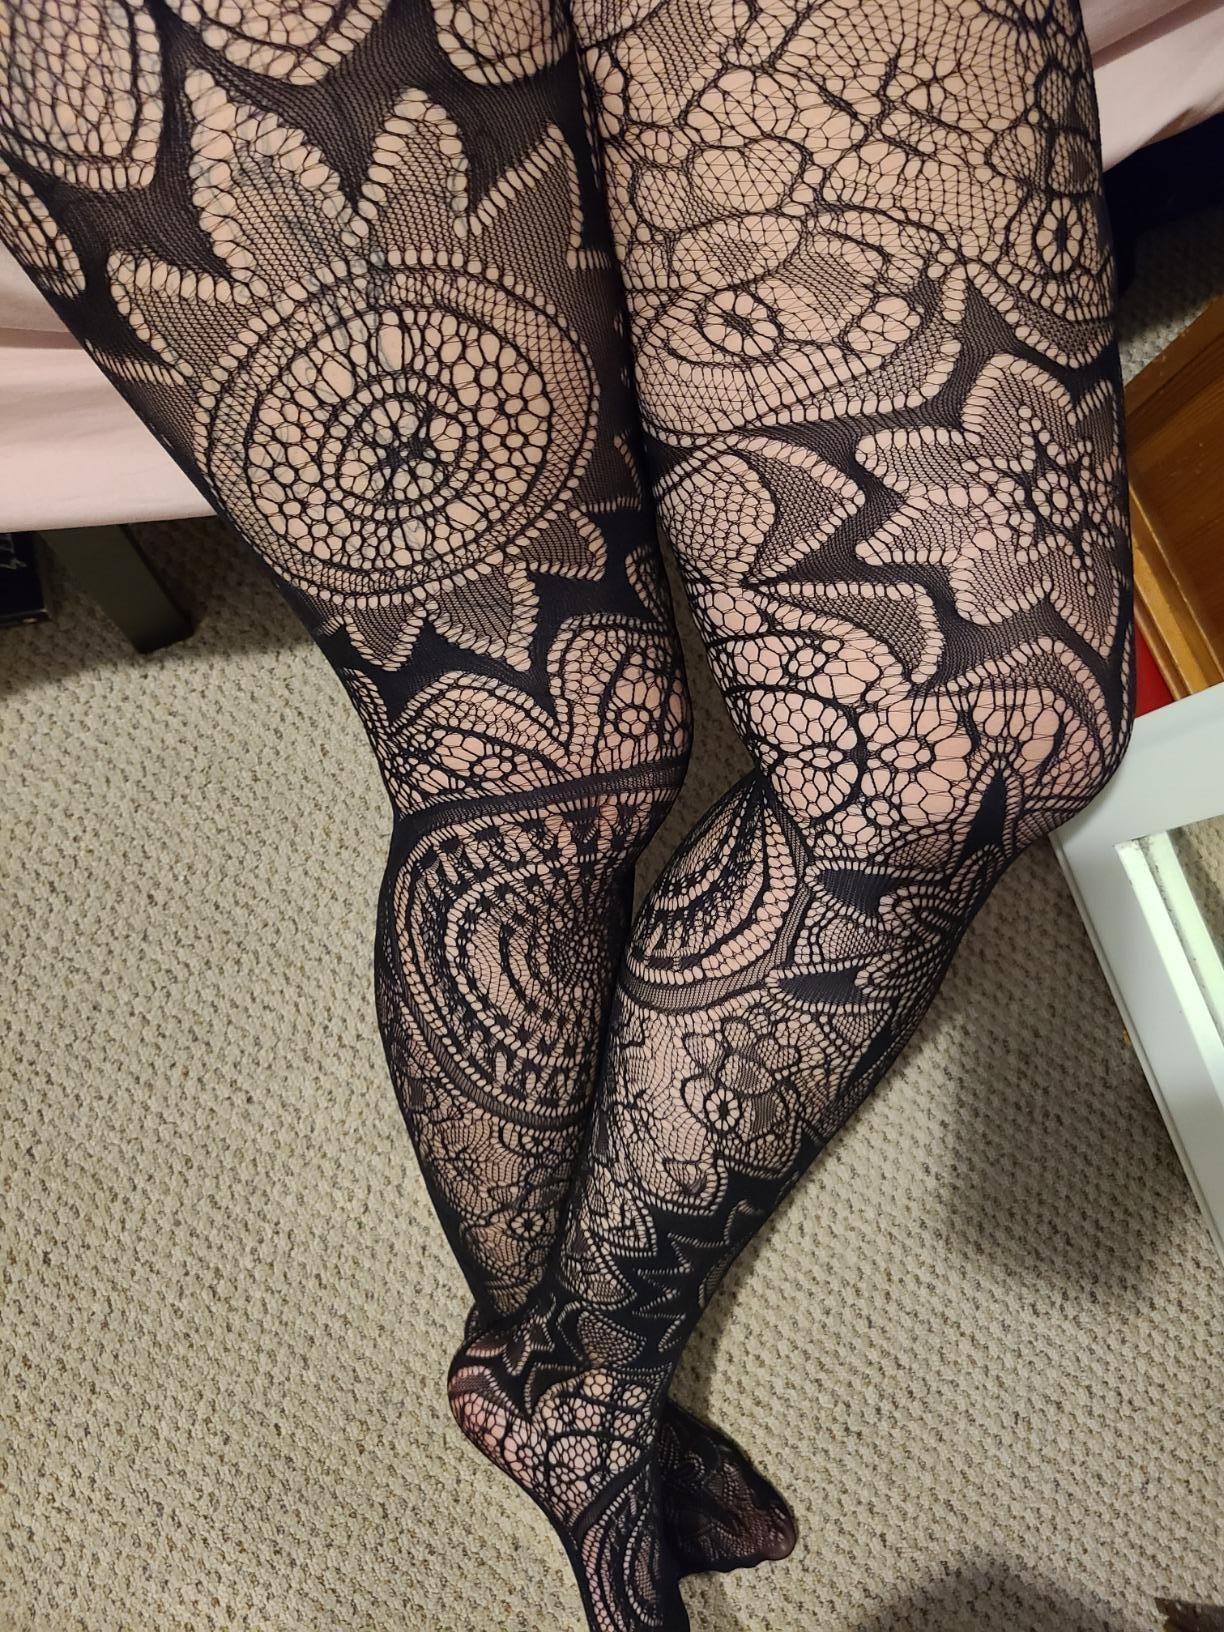 Best Patterned Tights To Wear This Season